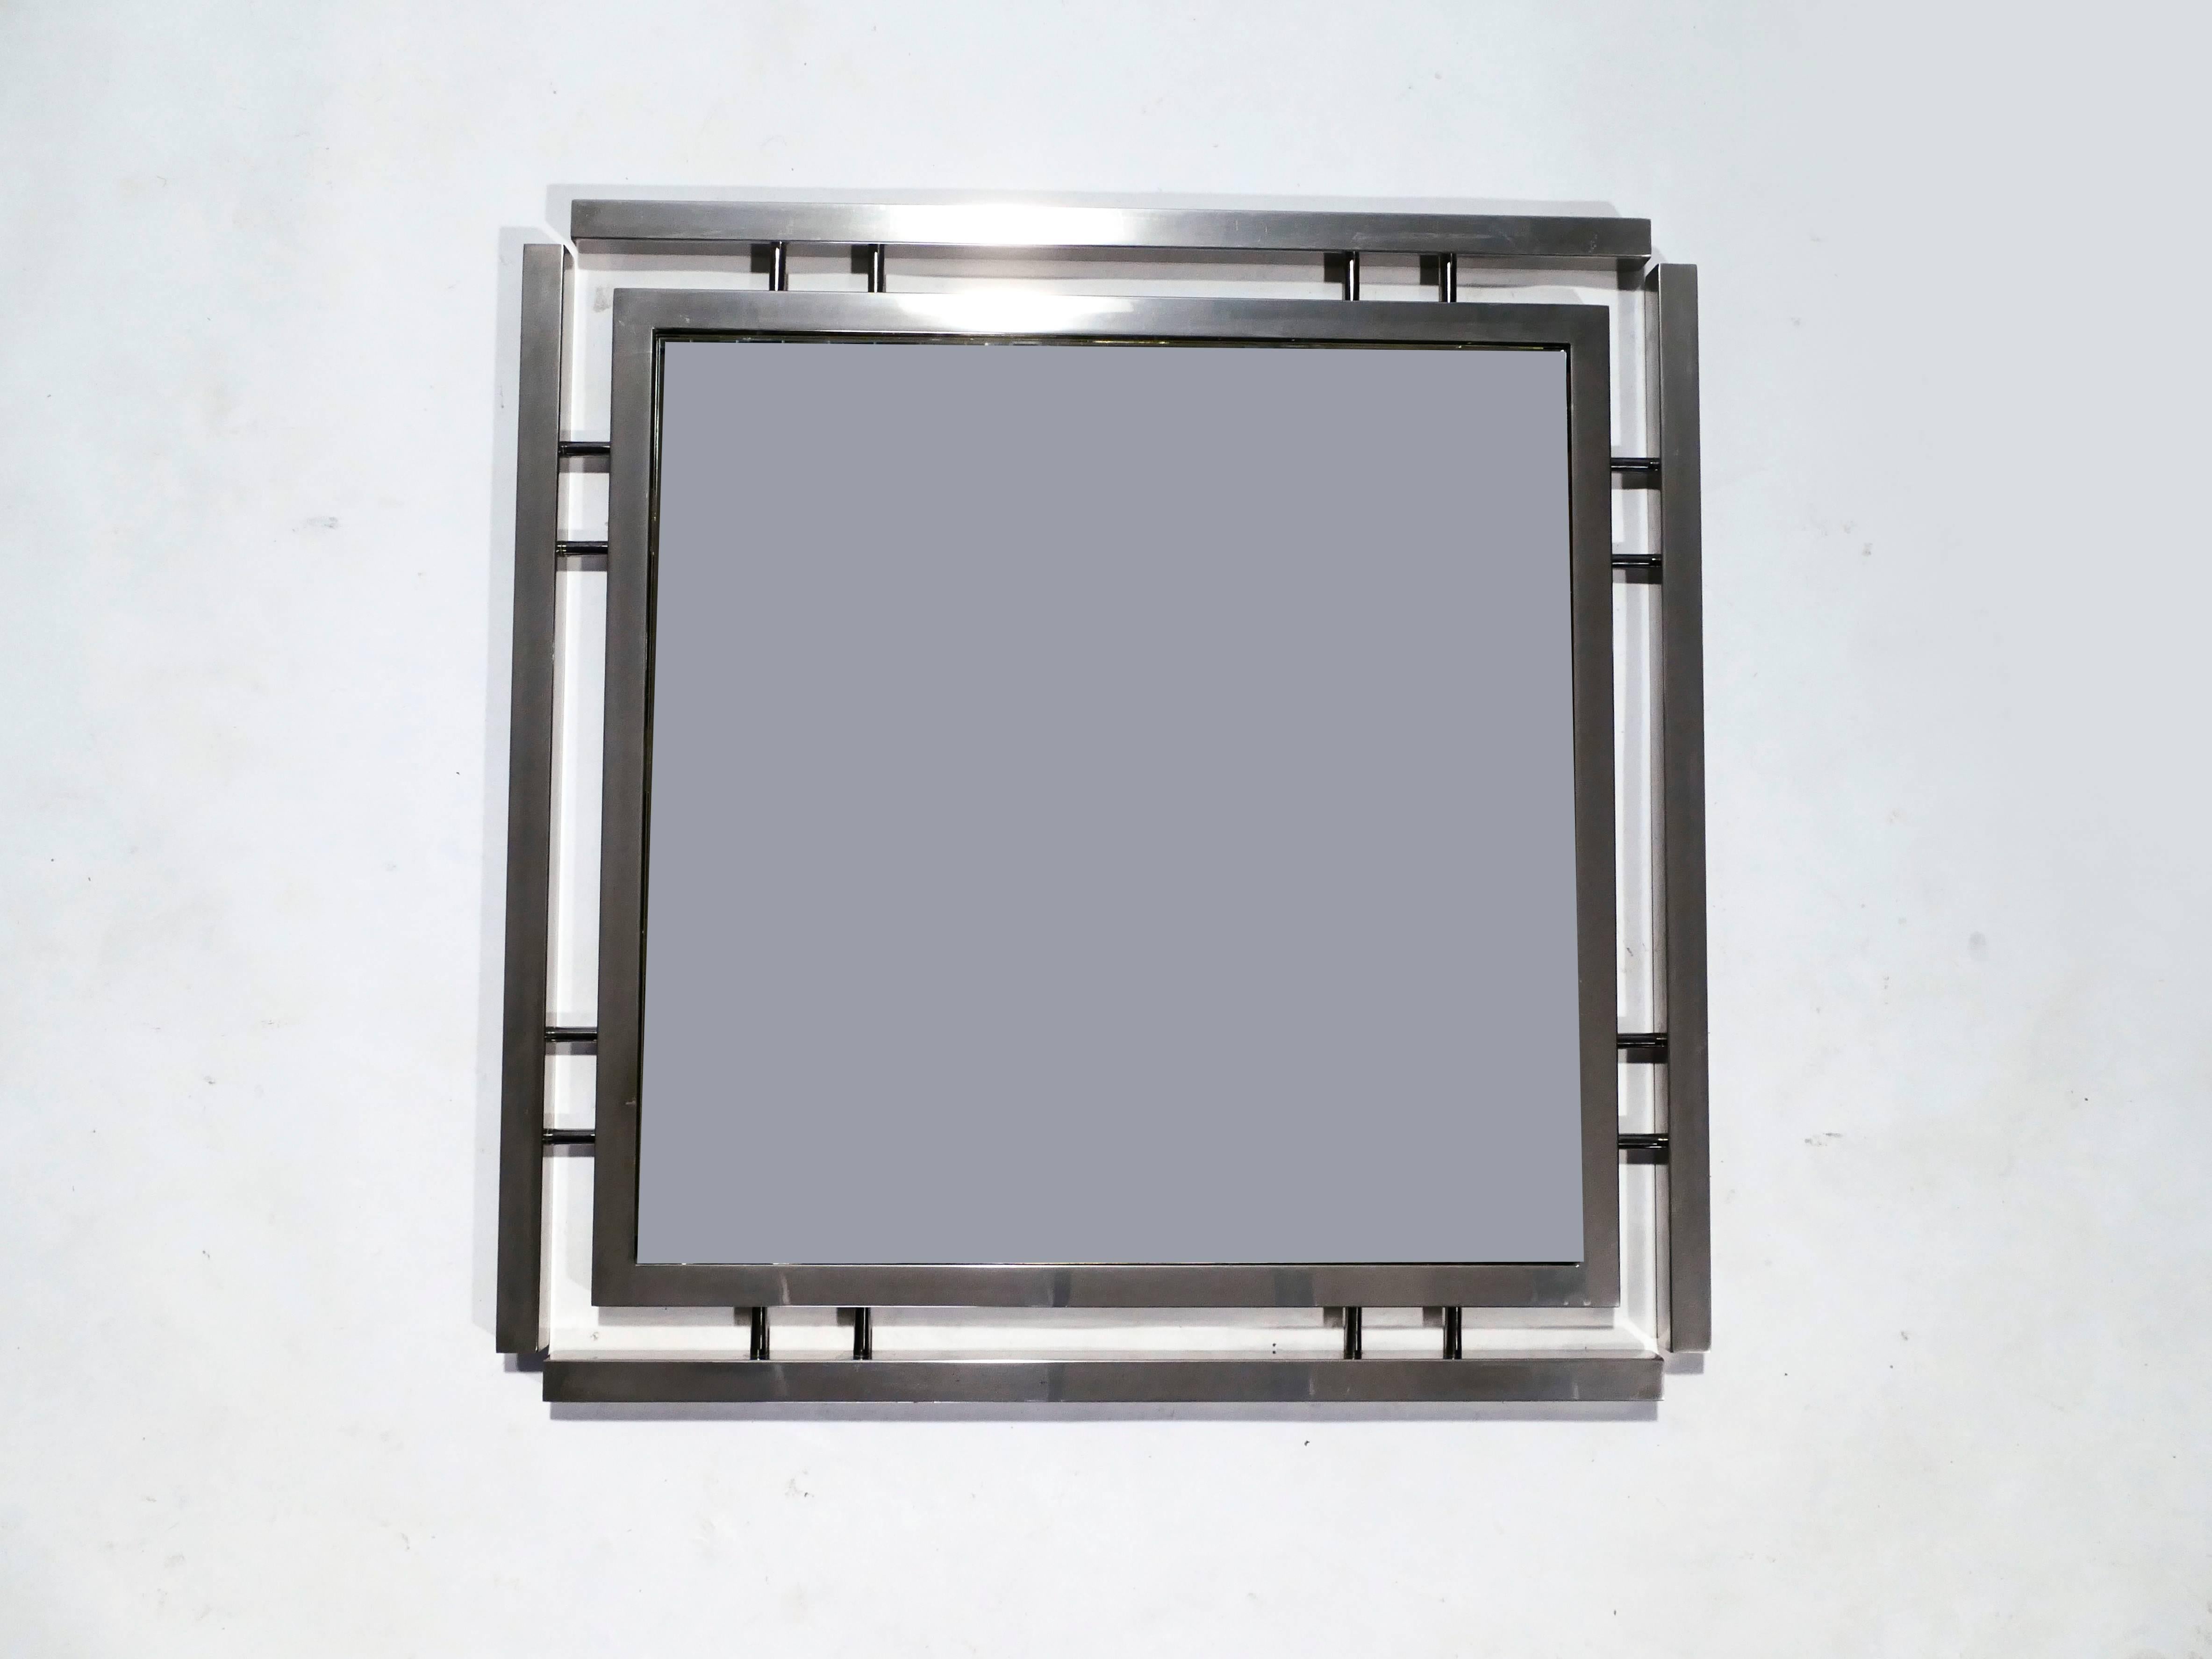 With its strong geometric design, this statement mirror is typical of French designer Guy Lefevre’s work for Maison Jansen. Its imposing chrome metal border surrounds the mirror, creating a chic, timeless piece. Found in very good vintage condition